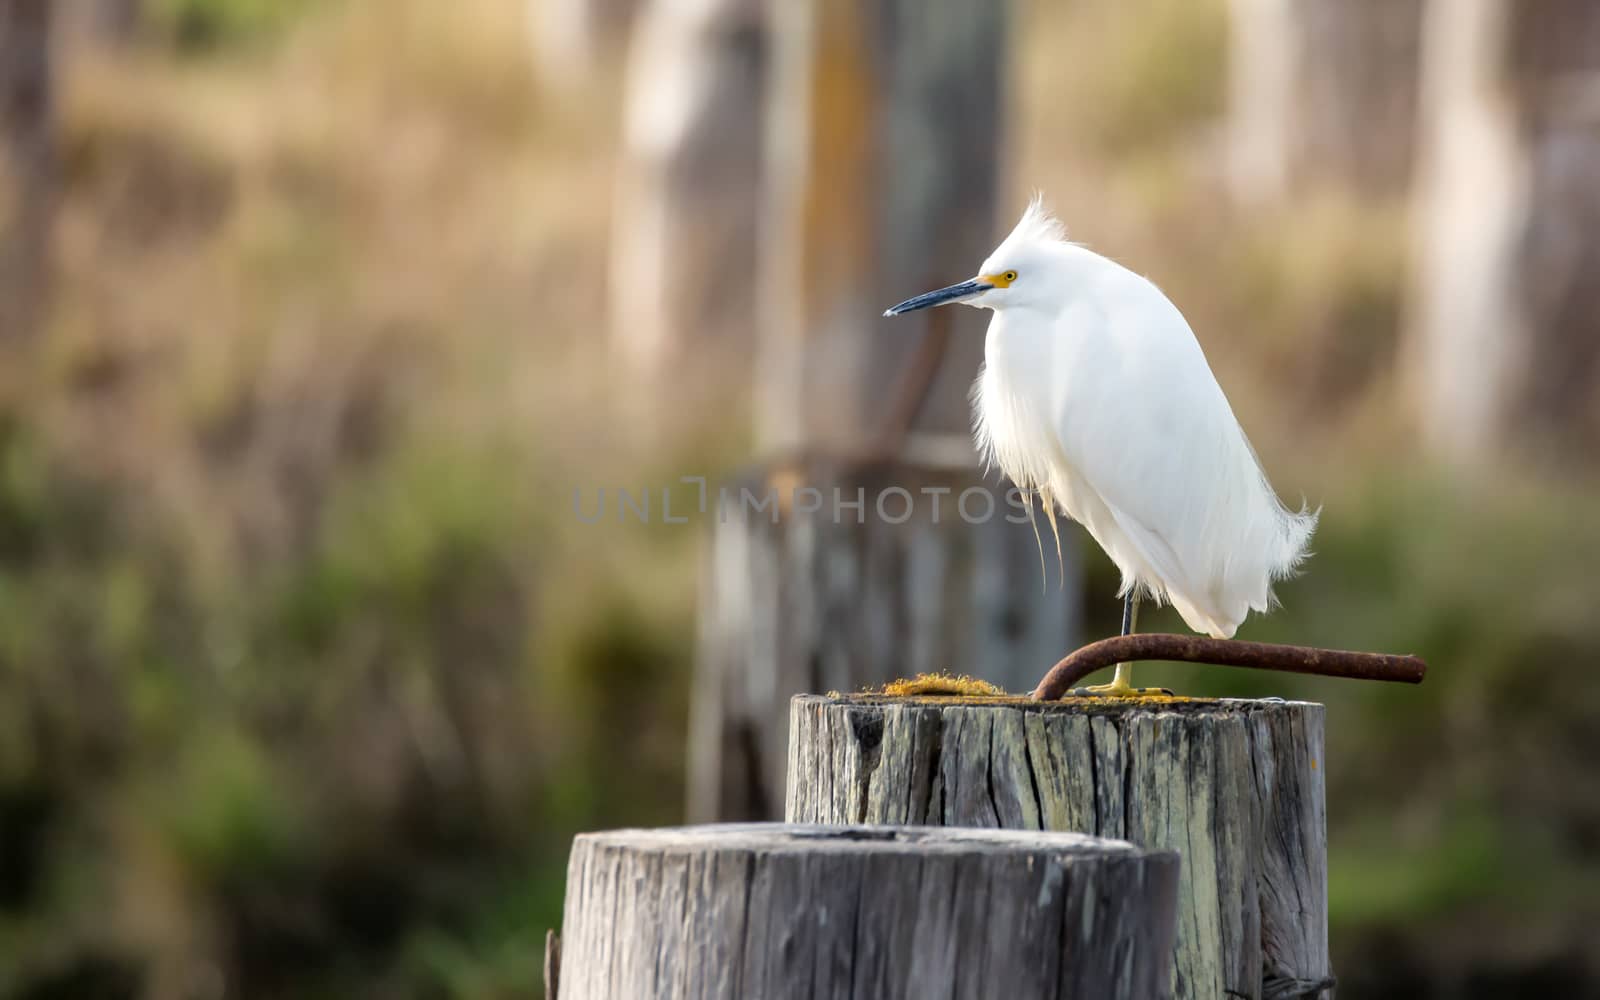 Wild Egret Perched on a Piling, Arcata, California, USA by backyard_photography